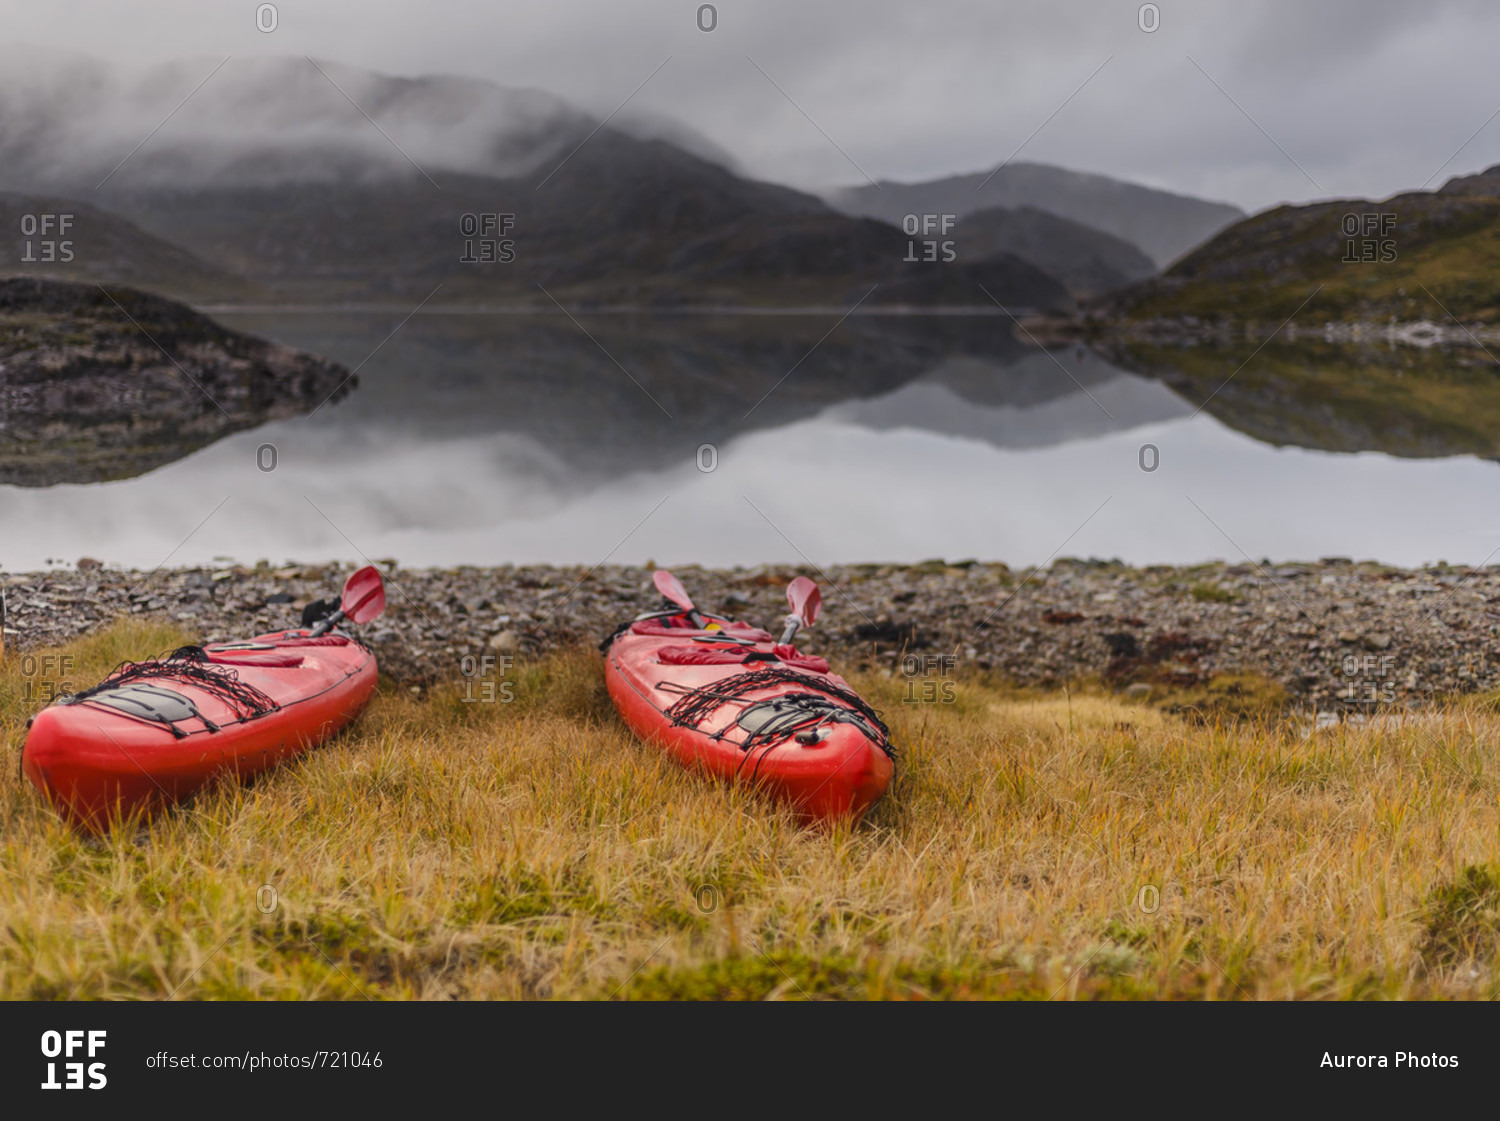 Expeditions, with fjord OFFSET stock photo shore Narsaq, on Tasermiut Greenland - tour Two kayaks of during